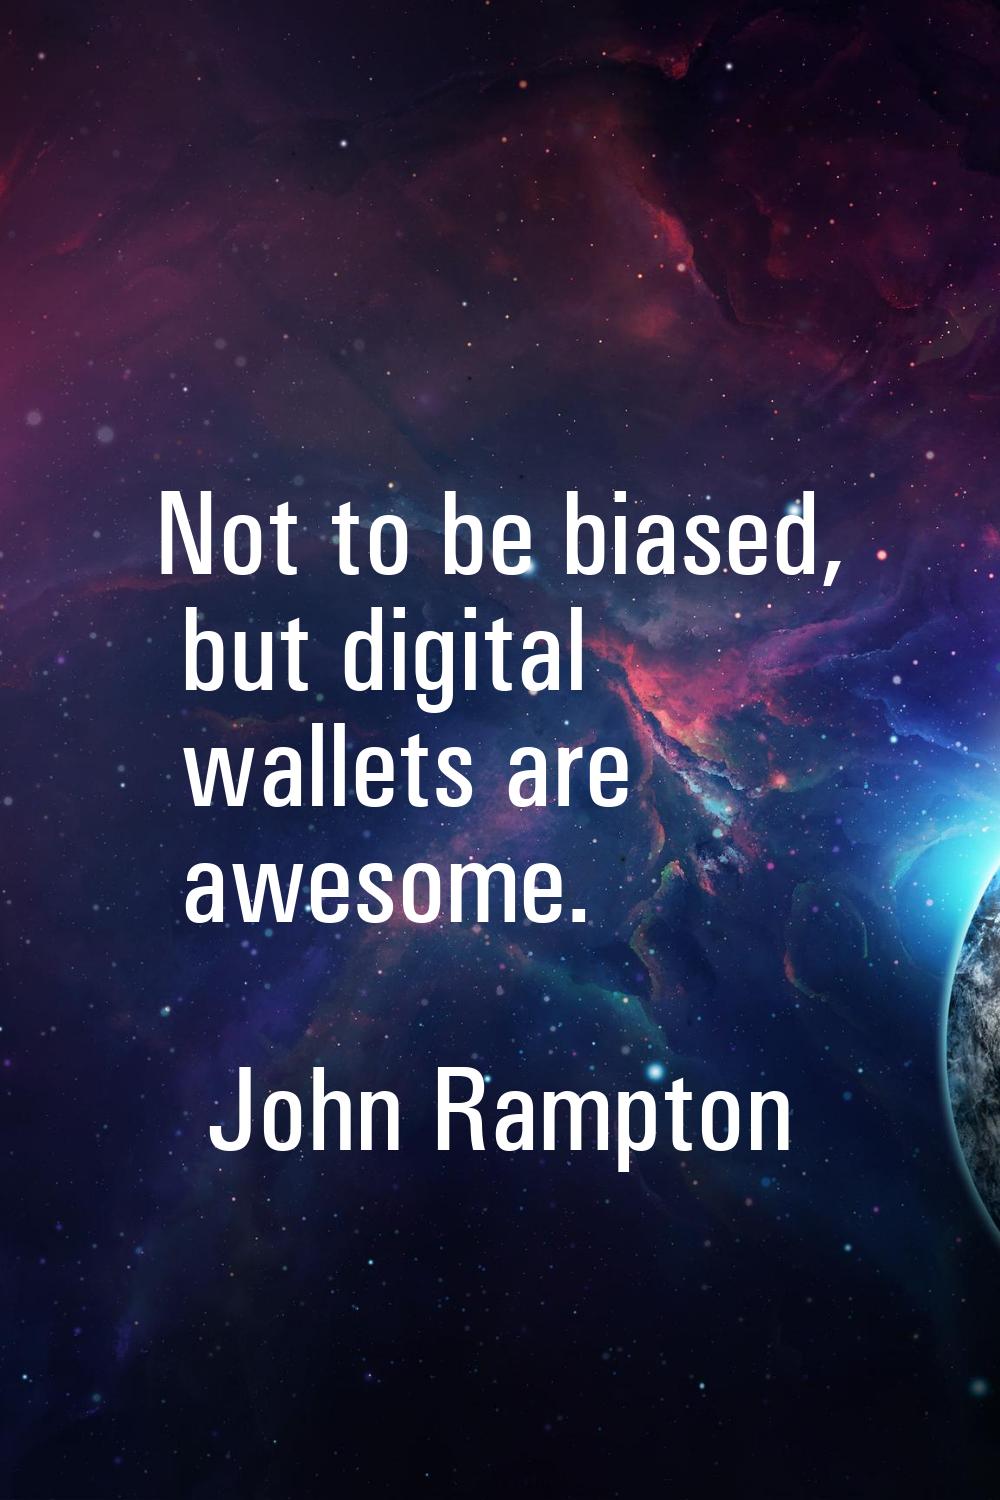 Not to be biased, but digital wallets are awesome.